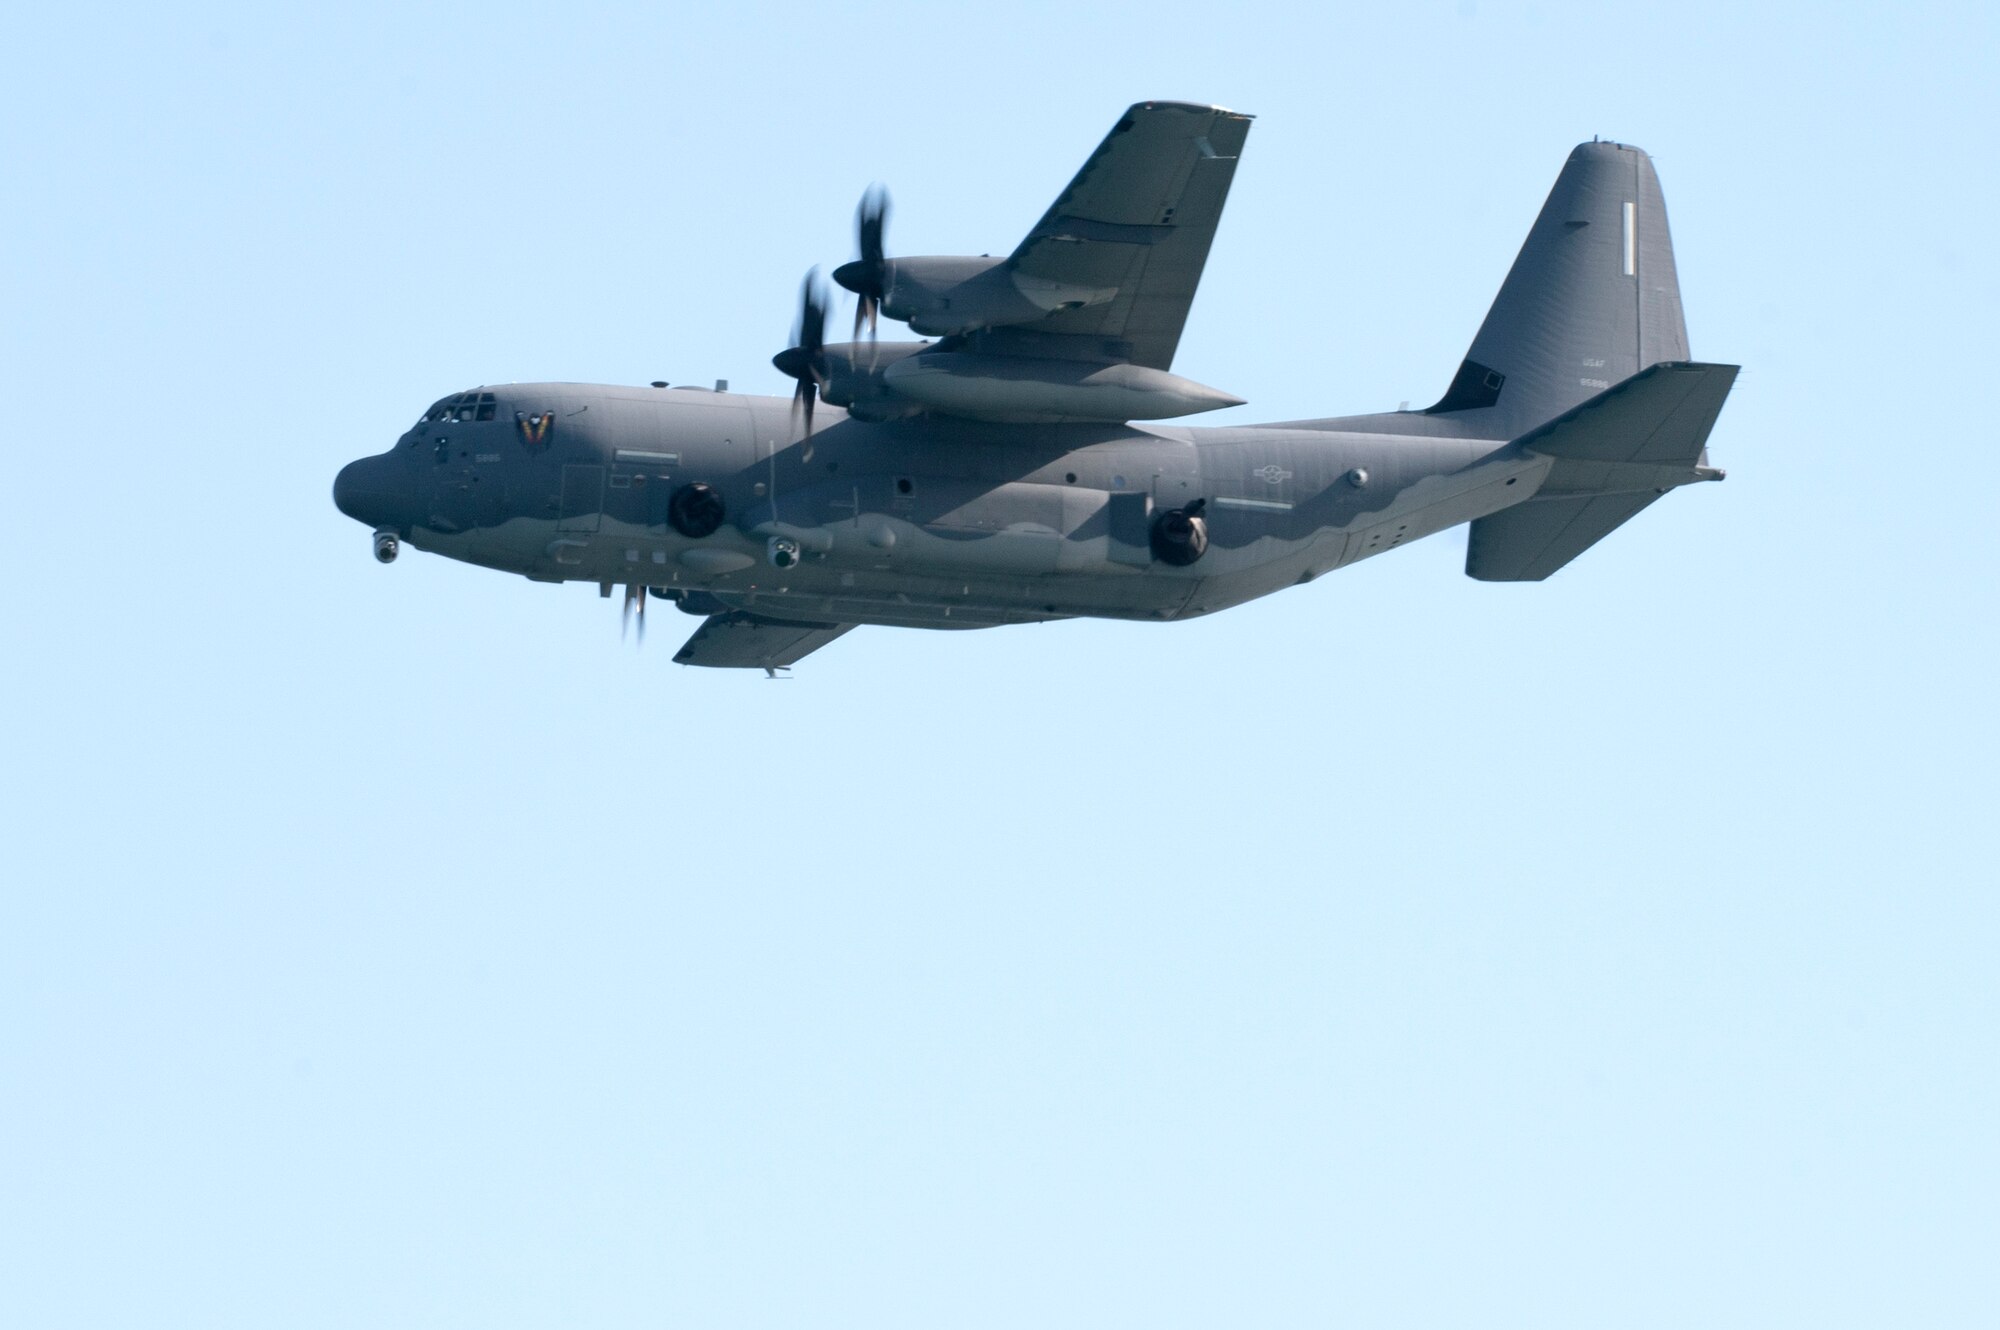 A 4th Special Operations Squadron AC-130J Ghostrider gunship assigned to Hurlburt Field, Fla., flies over during The Doolittle Raiders’ 80th Anniversary ceremony, April 18, 2022 at Okaloosa Island. On May 23, 2014, President Barack Obama signed Public Law 113-106 awarding the Congressional Gold Medal – the highest civilian recognition Congress can bestow – to the 80 members of the Doolittle Tokyo Raid in recognition of their service.